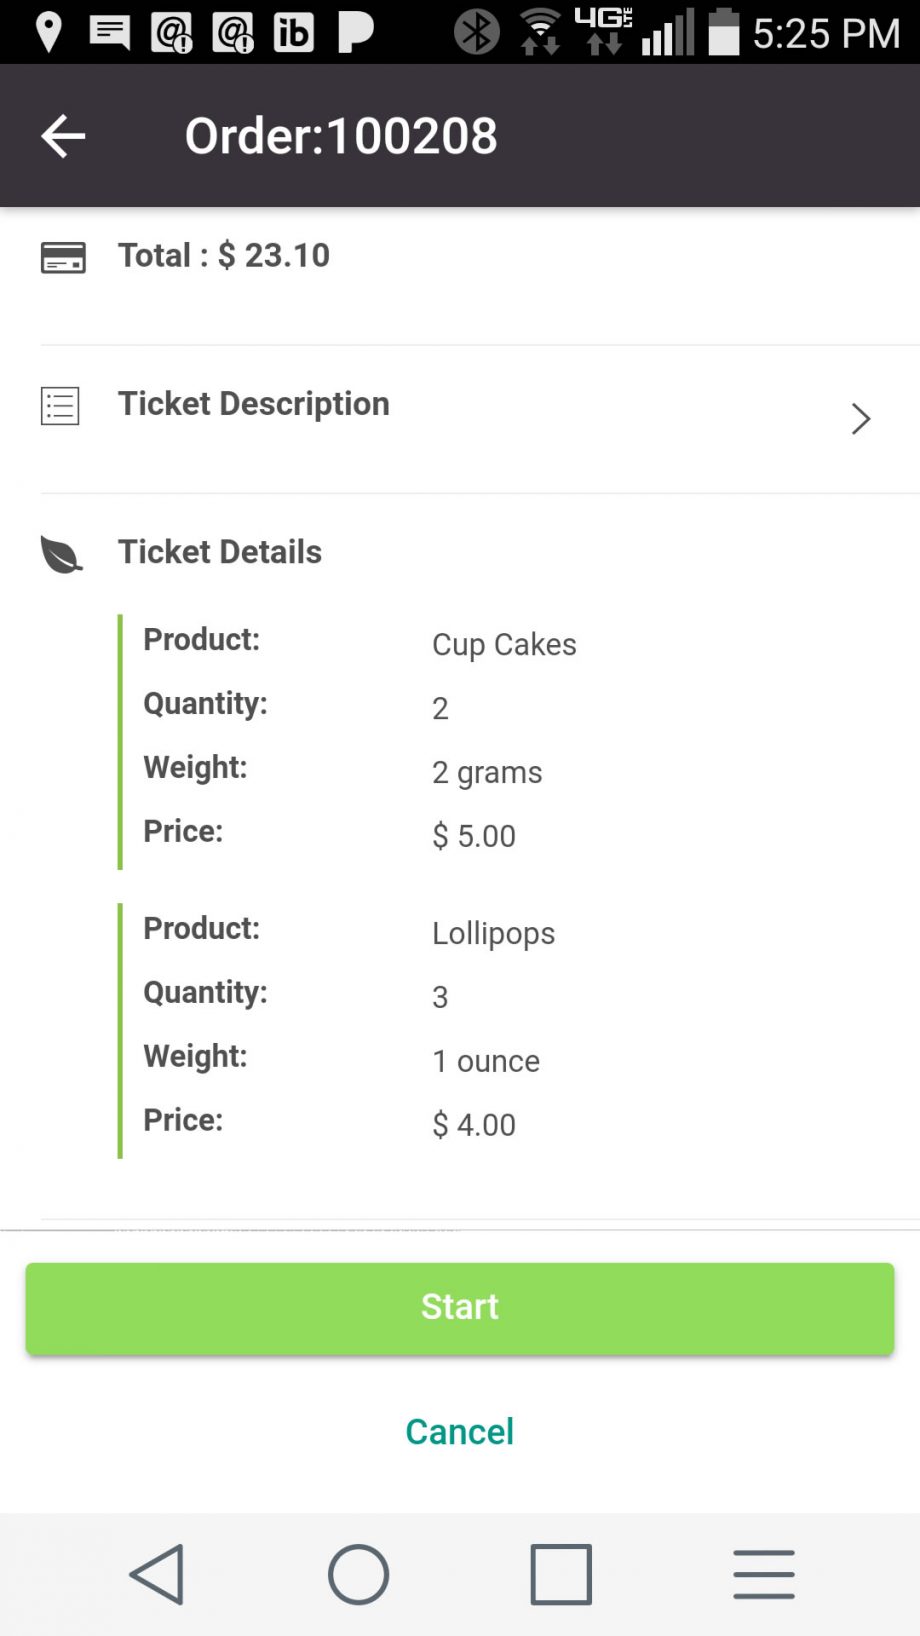 Order Items Screenshot from Zippykind delivery app